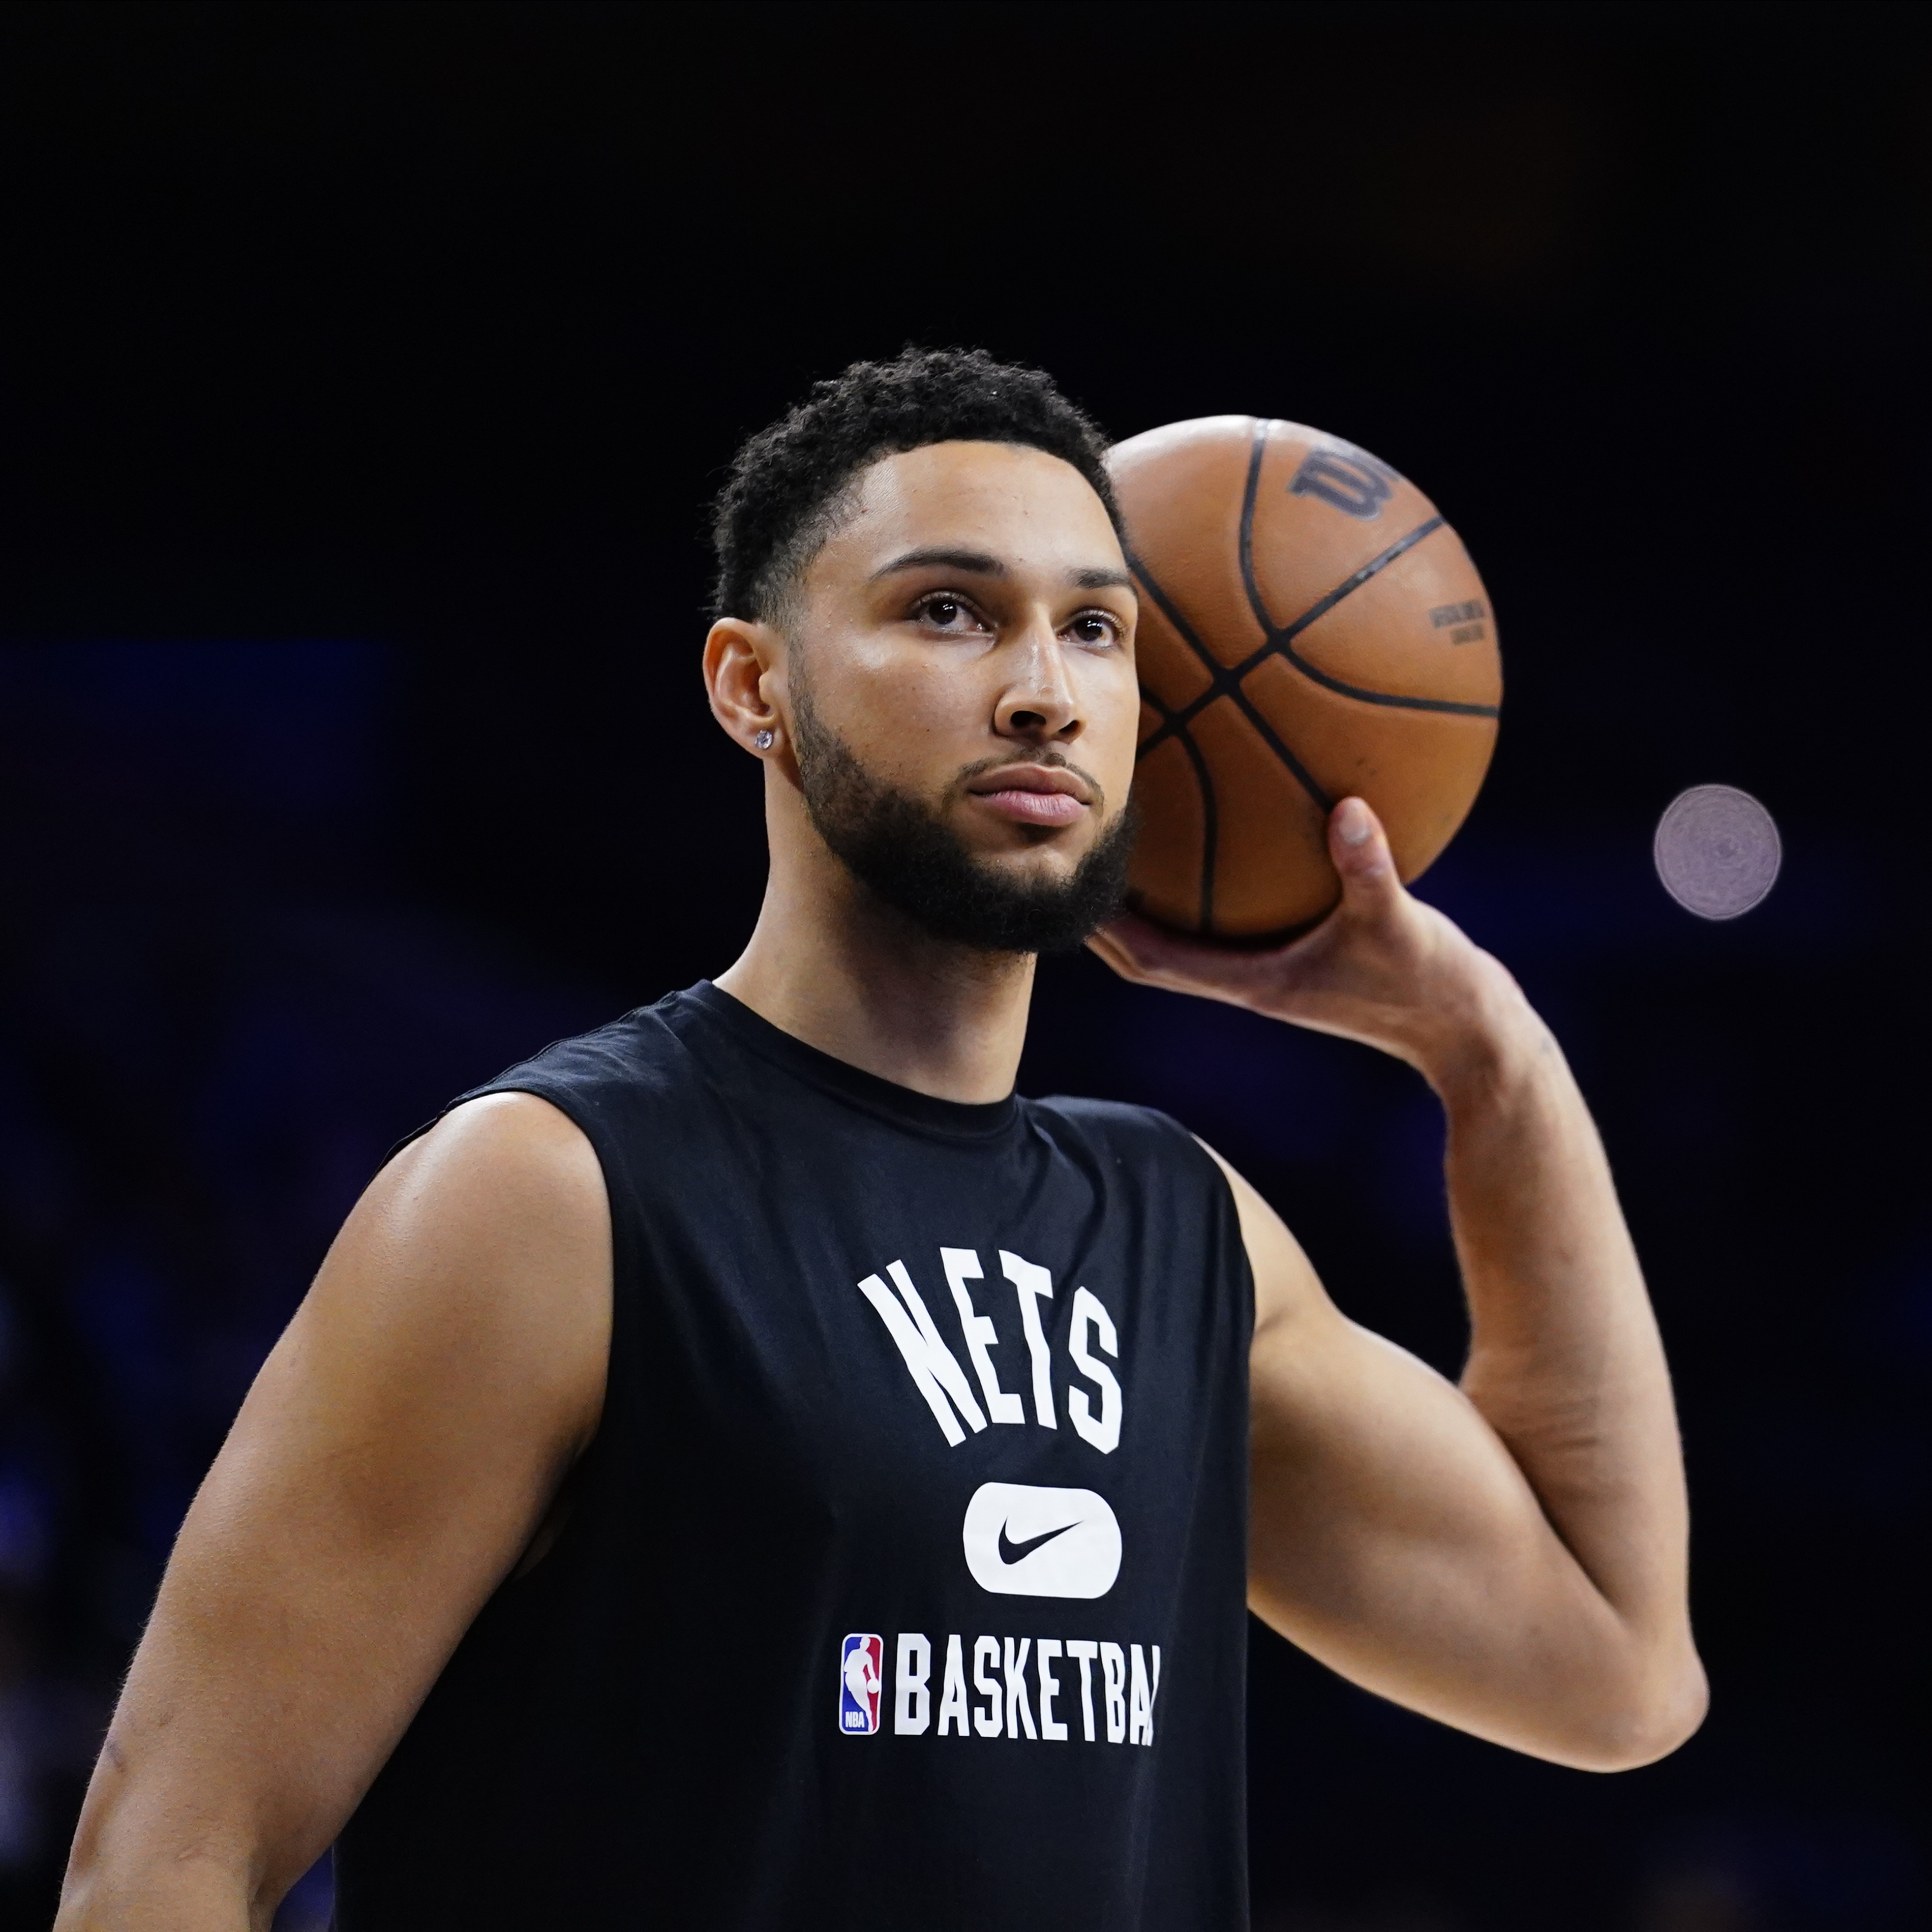 Nets GM Defends Ben Simmons amid Injury: 'We Saw How He Wanted to Get Out There'